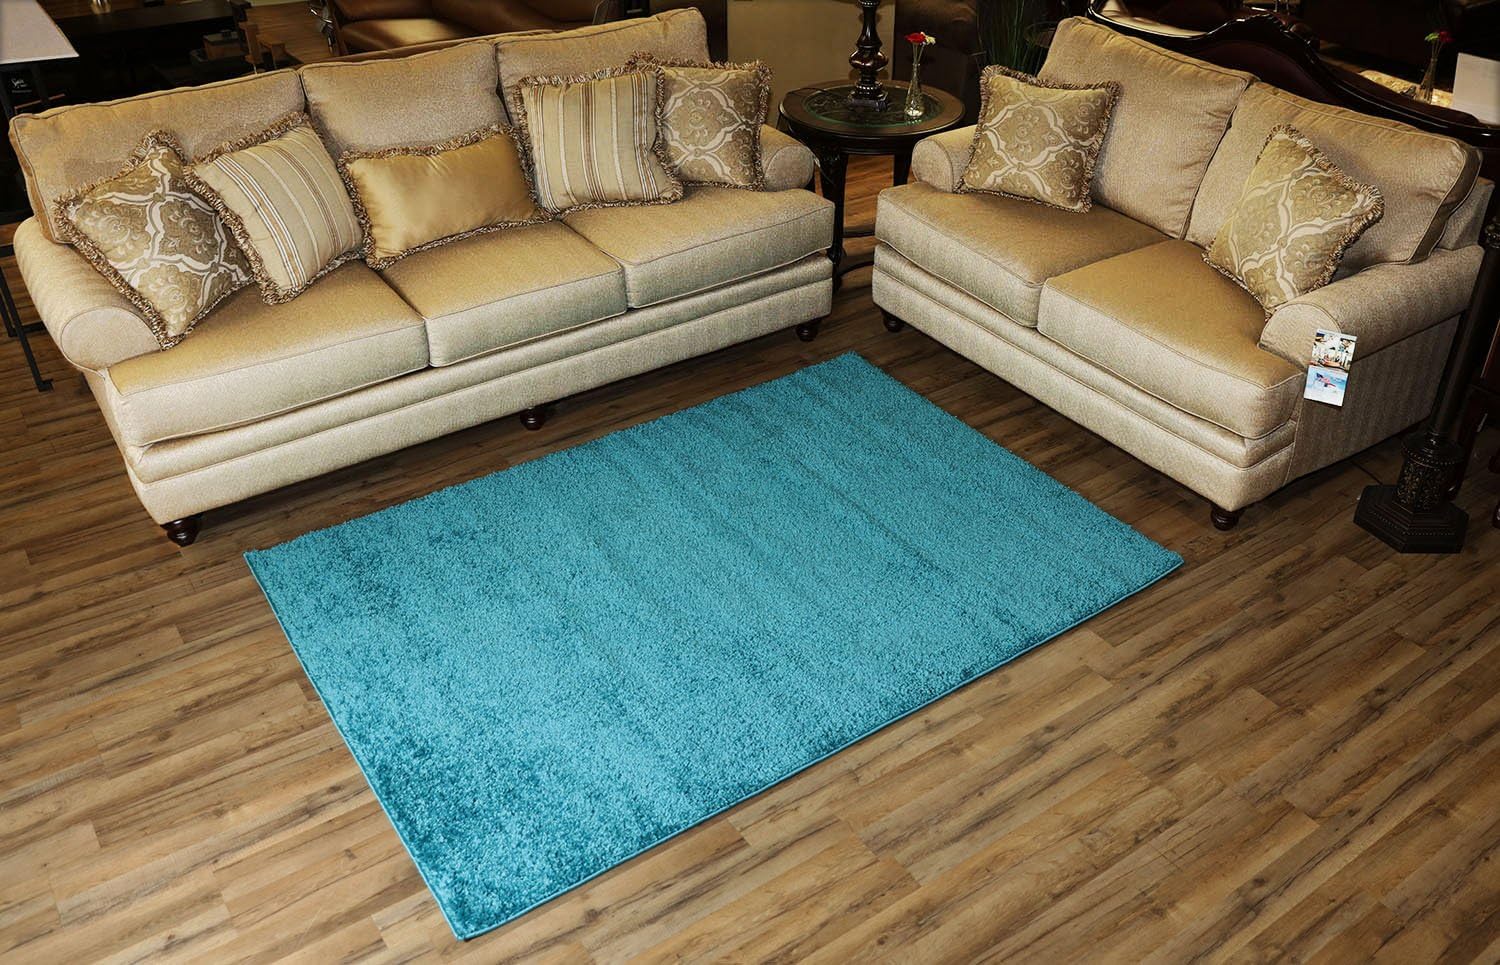 SOHO Shaggy Collection Solid Color Shag Area Rug (Turquoise Blue, 5 x 7) - 0